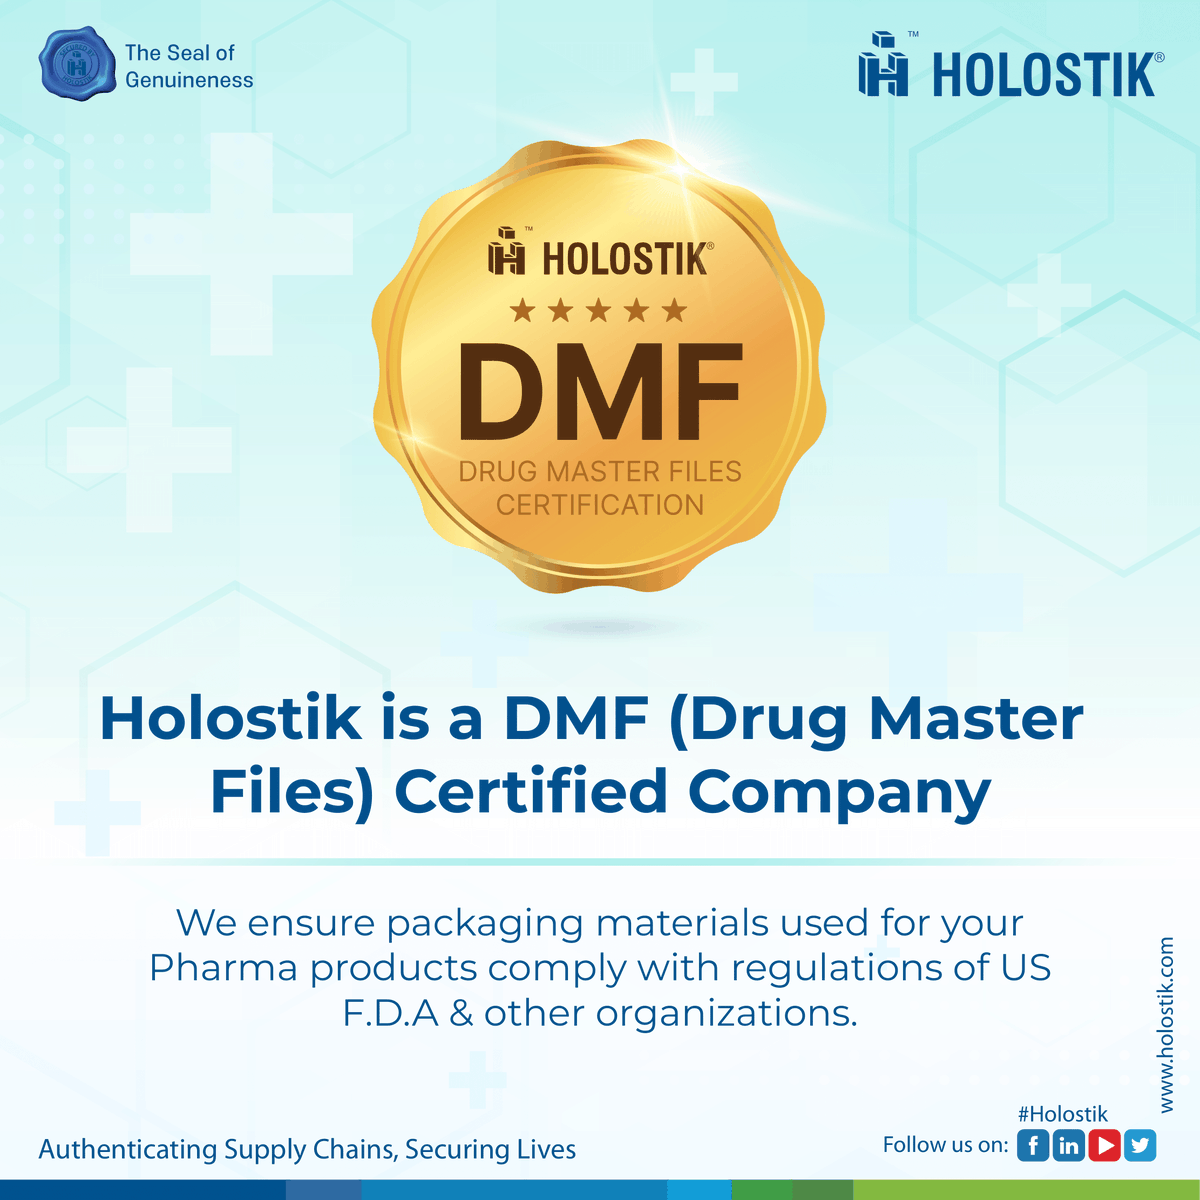 Are you a Pharma manufacturer looking for DMF certified packaging partner?

Look no further, #Holostik is a DMF certified company that offers a variety of anti-duplication, packaging and digital solutions for Pharma.

 #DMF #Pharma #USFDA #Pharmacompanies #Medicines